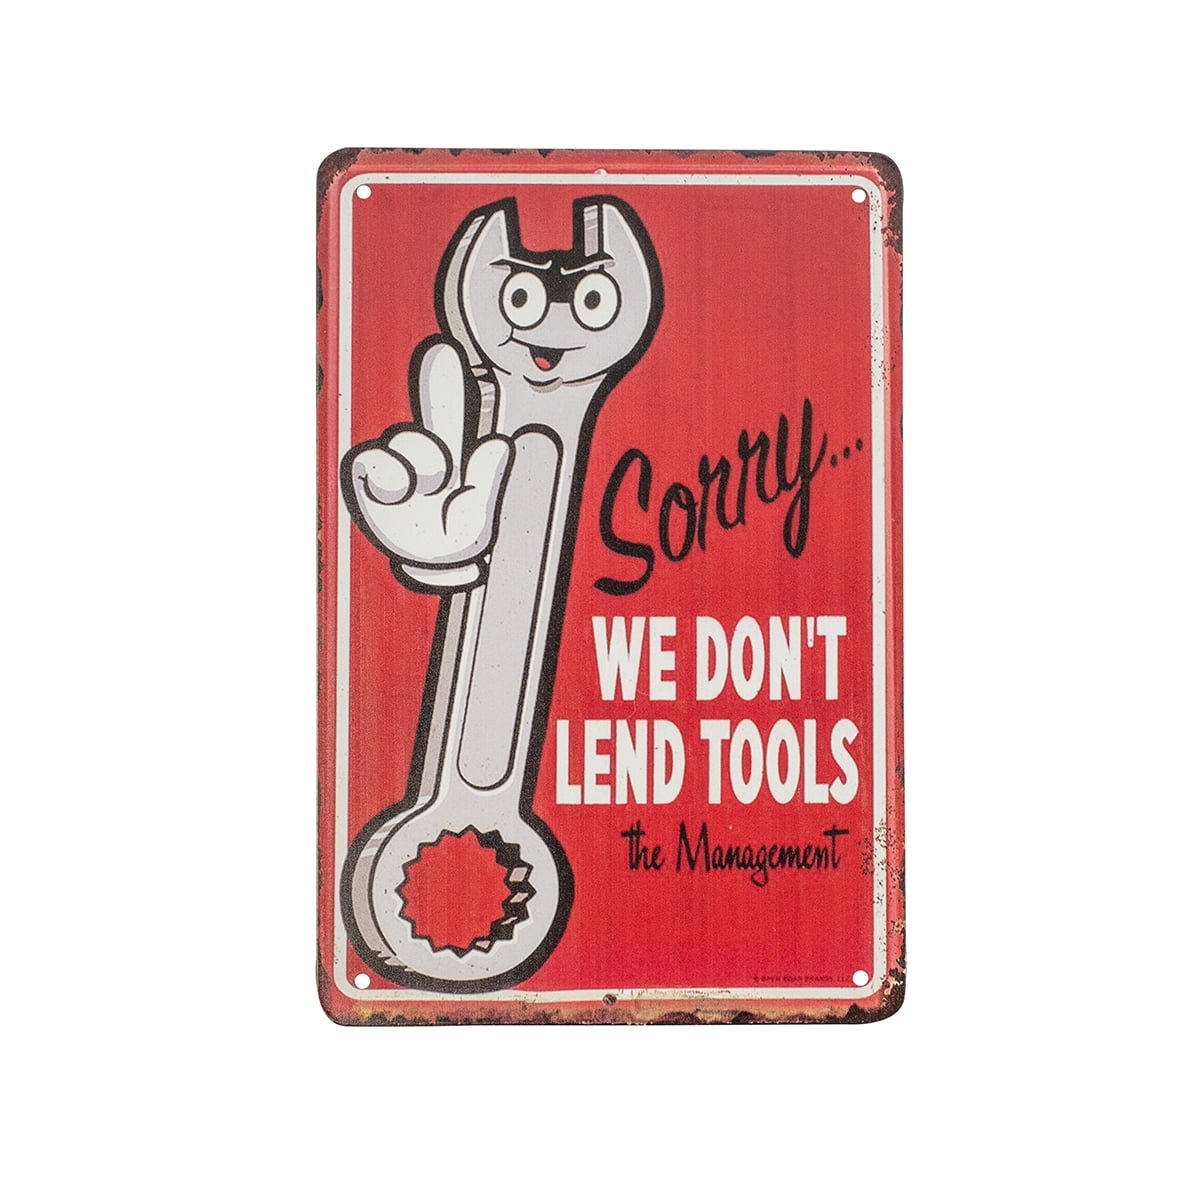 Funny Metal Sorry We Dont Lend Tools 8x12 Wall Sign Novelty Retro